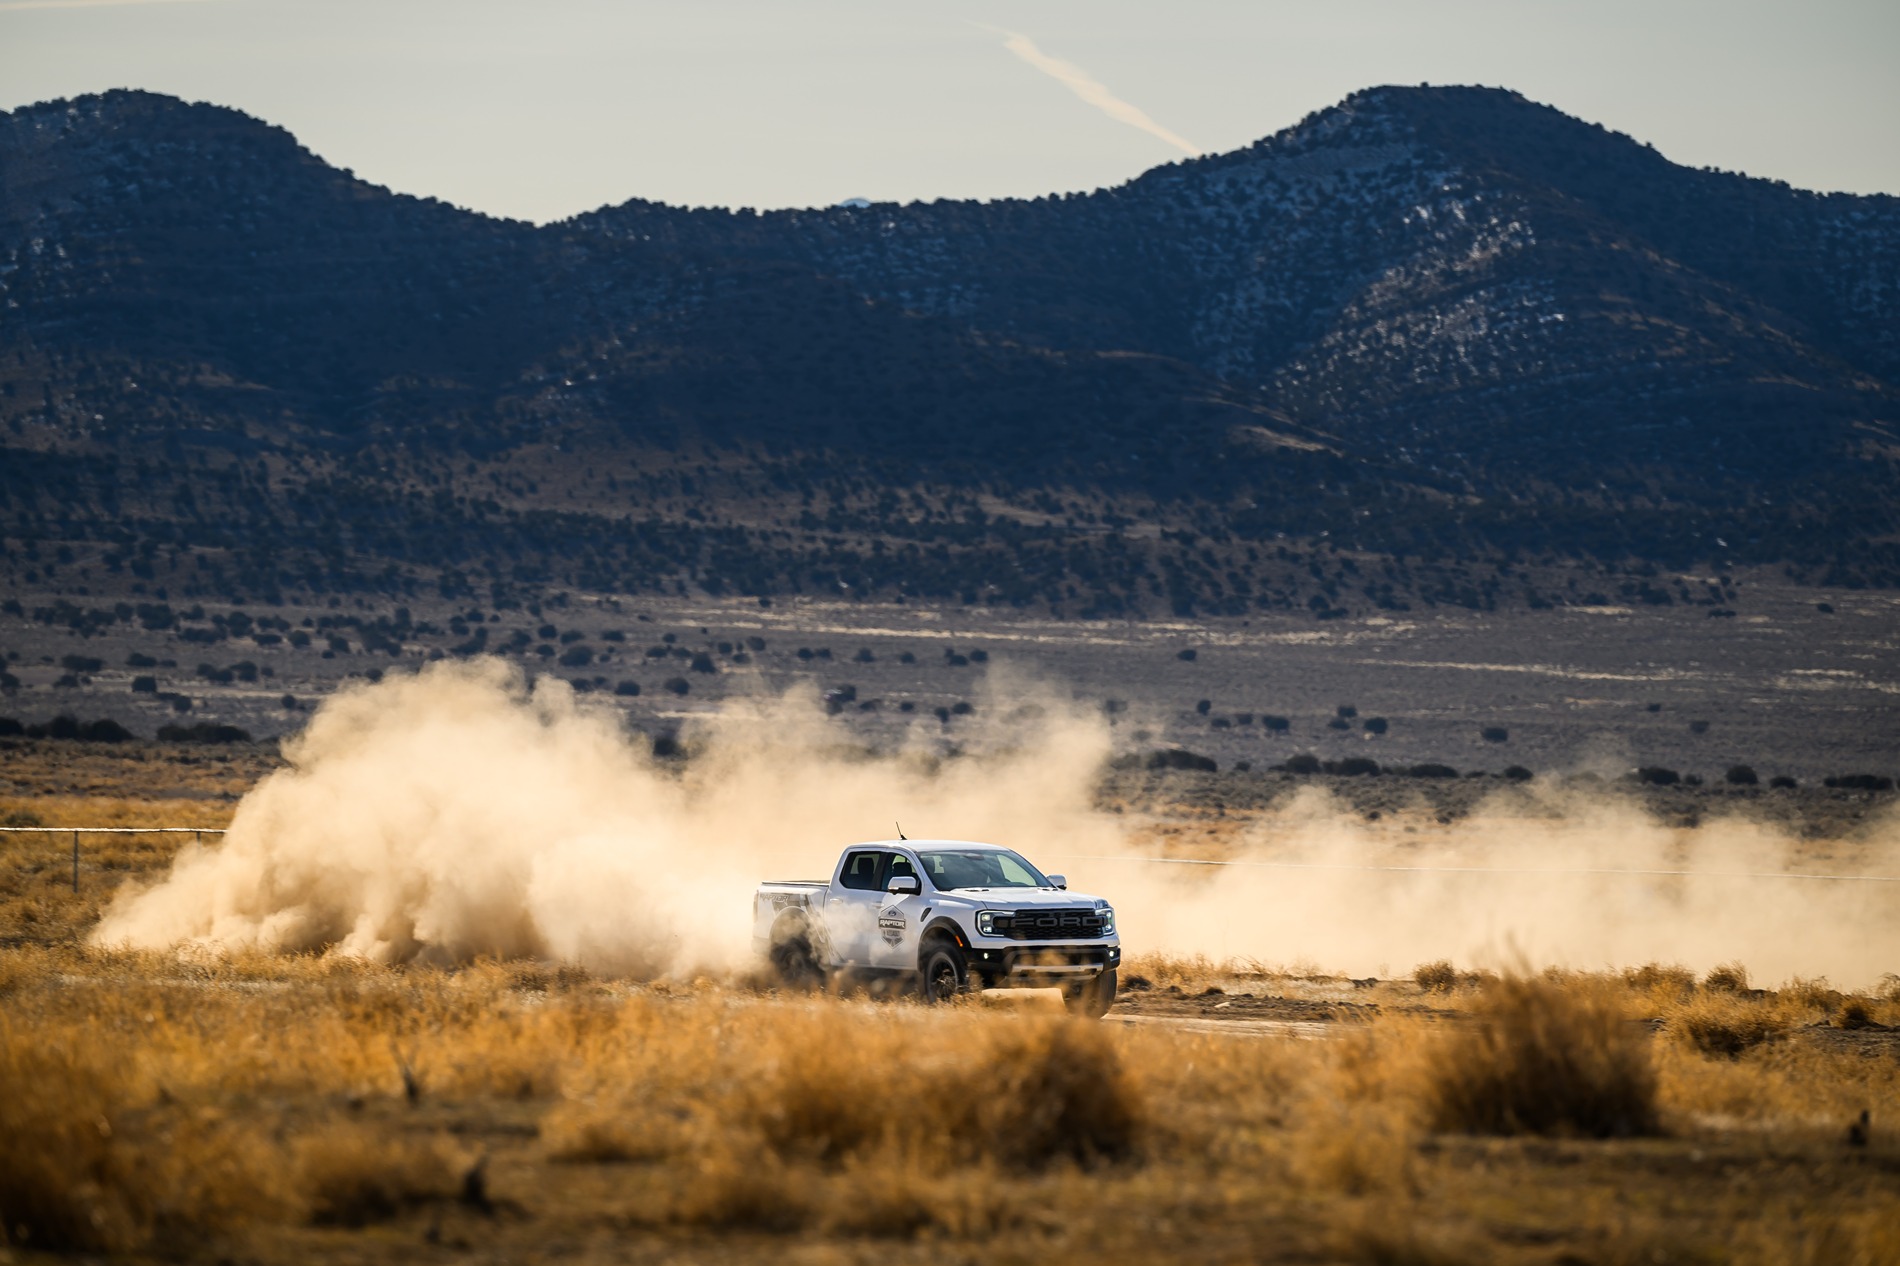 Ford Ranger Ranger Raptor Assault School Announced Exclusively (& Free) for Owners Ford Performance Racing School_Raptor Assault 17